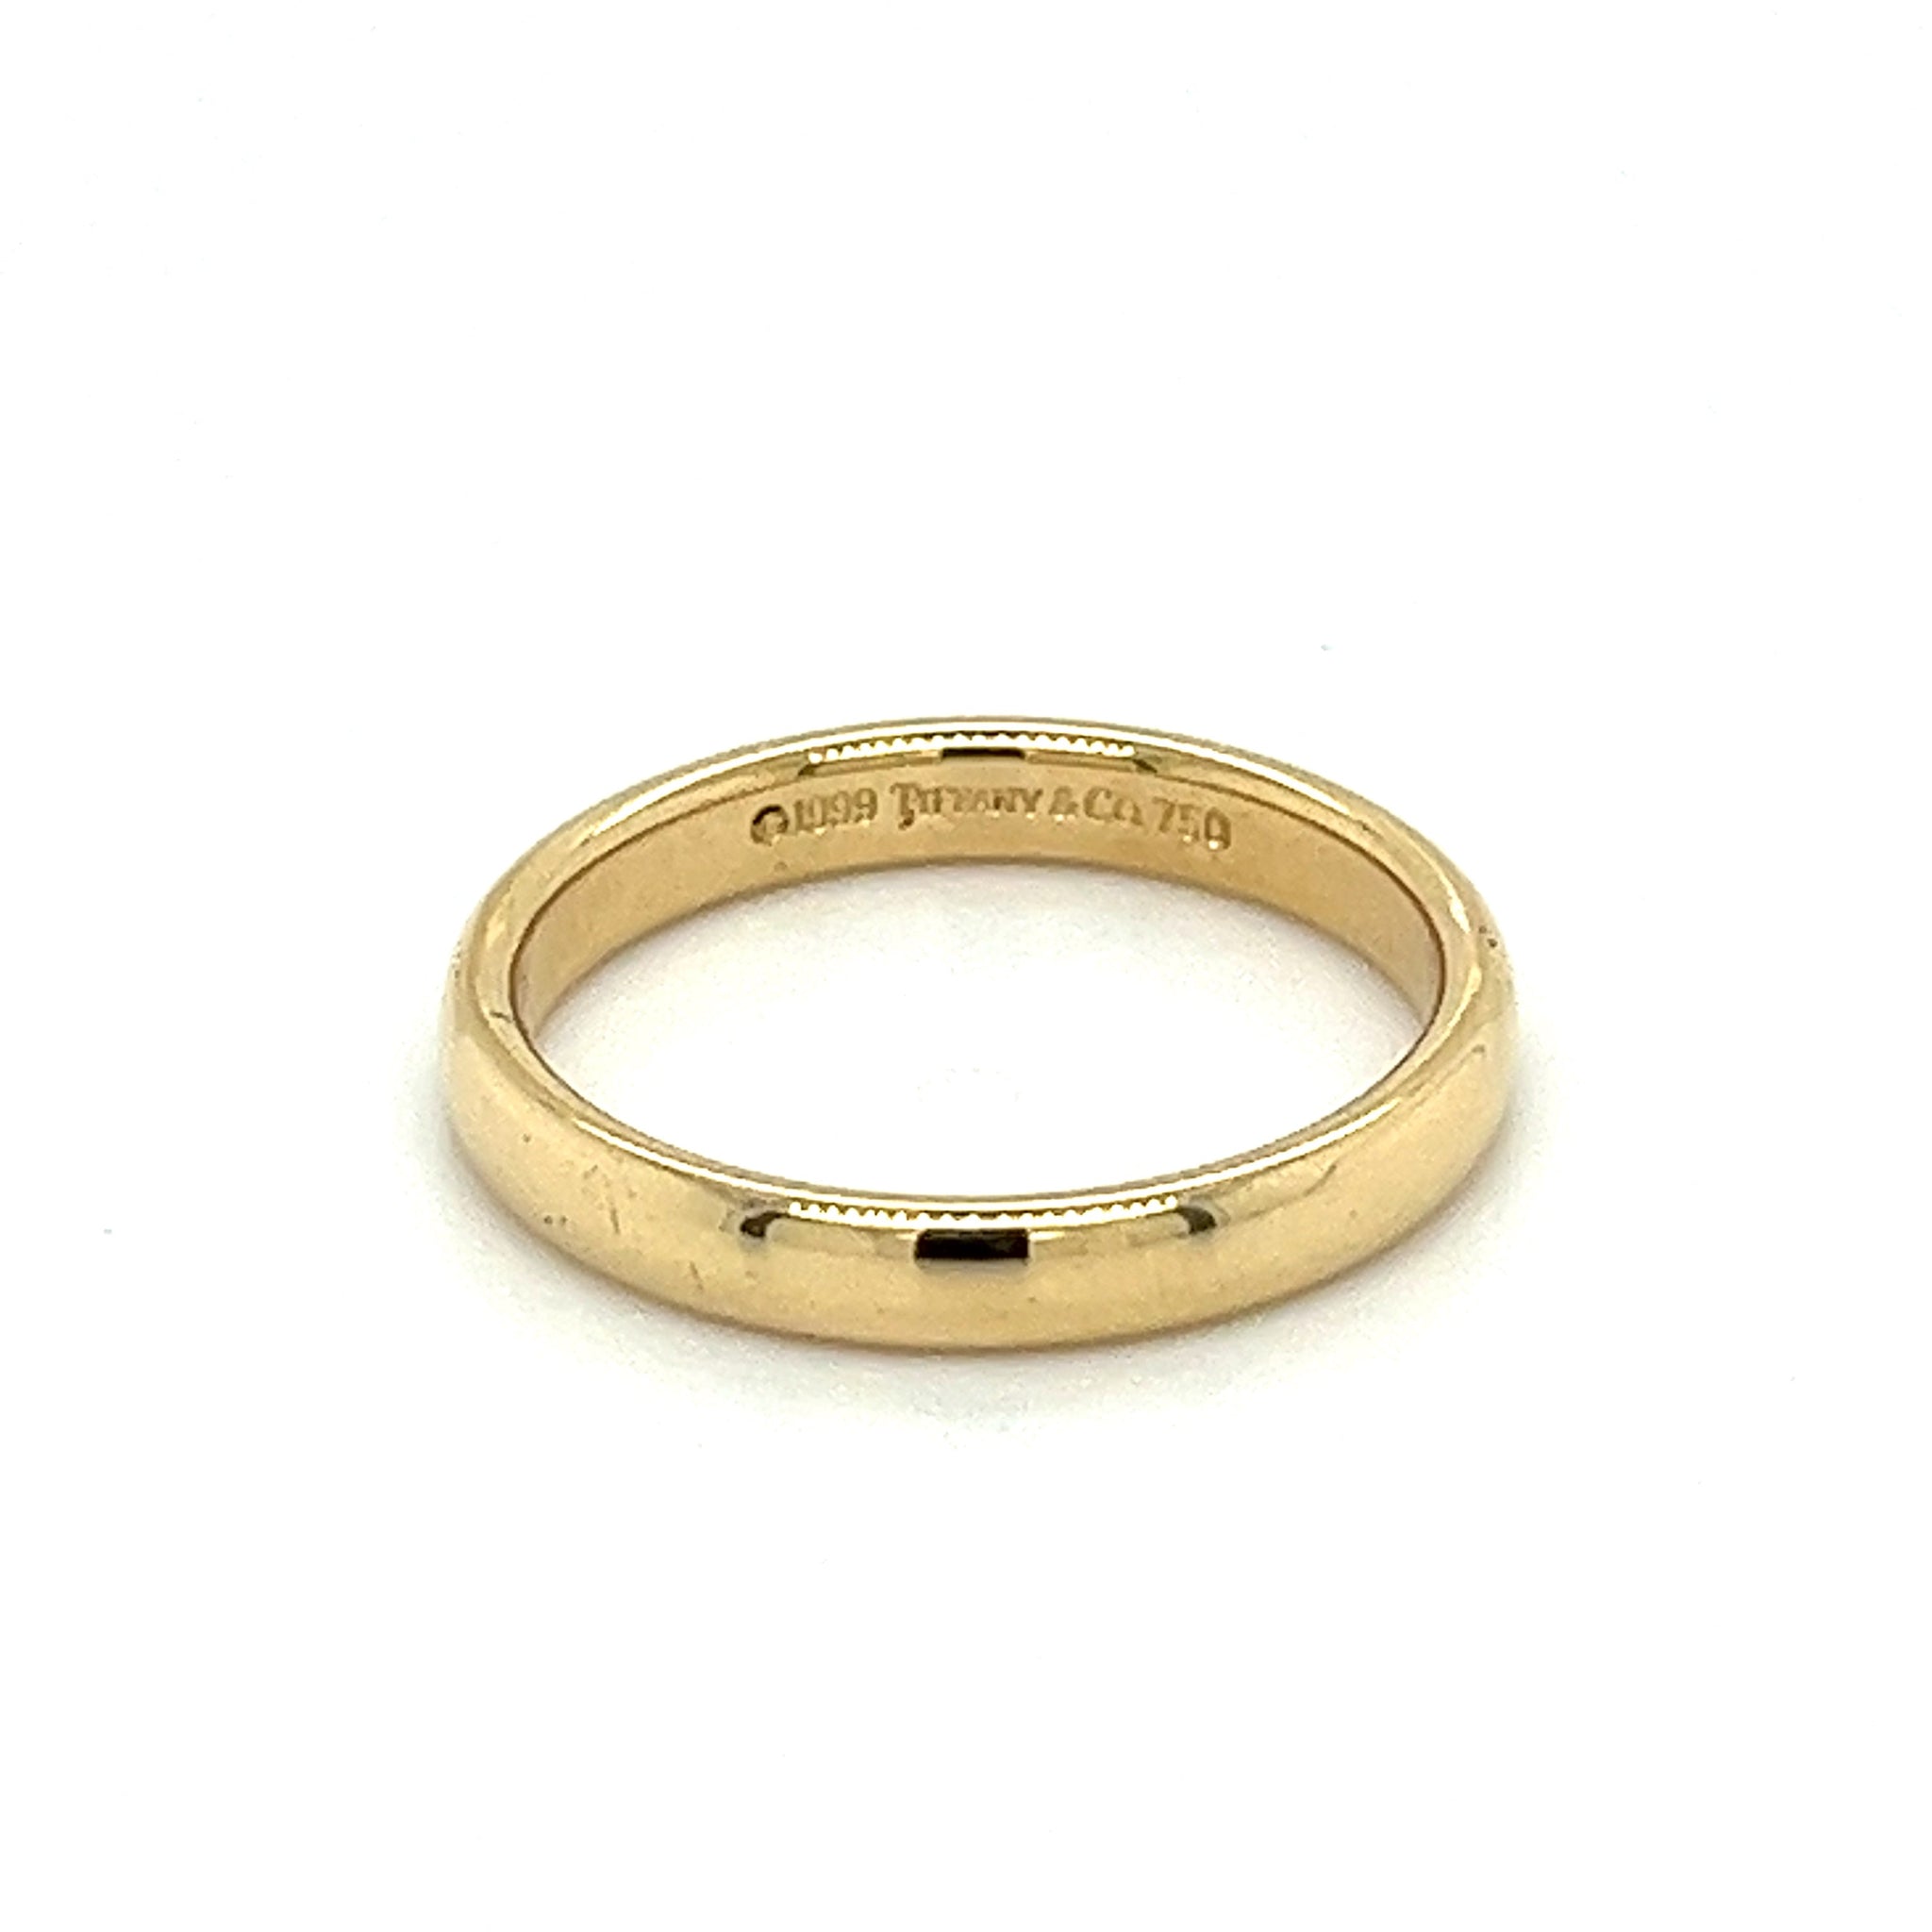 Tiffany & Co. Signed 18K Solid Yellow Gold Wedding Ring Band-Gold Ring-ASSAY